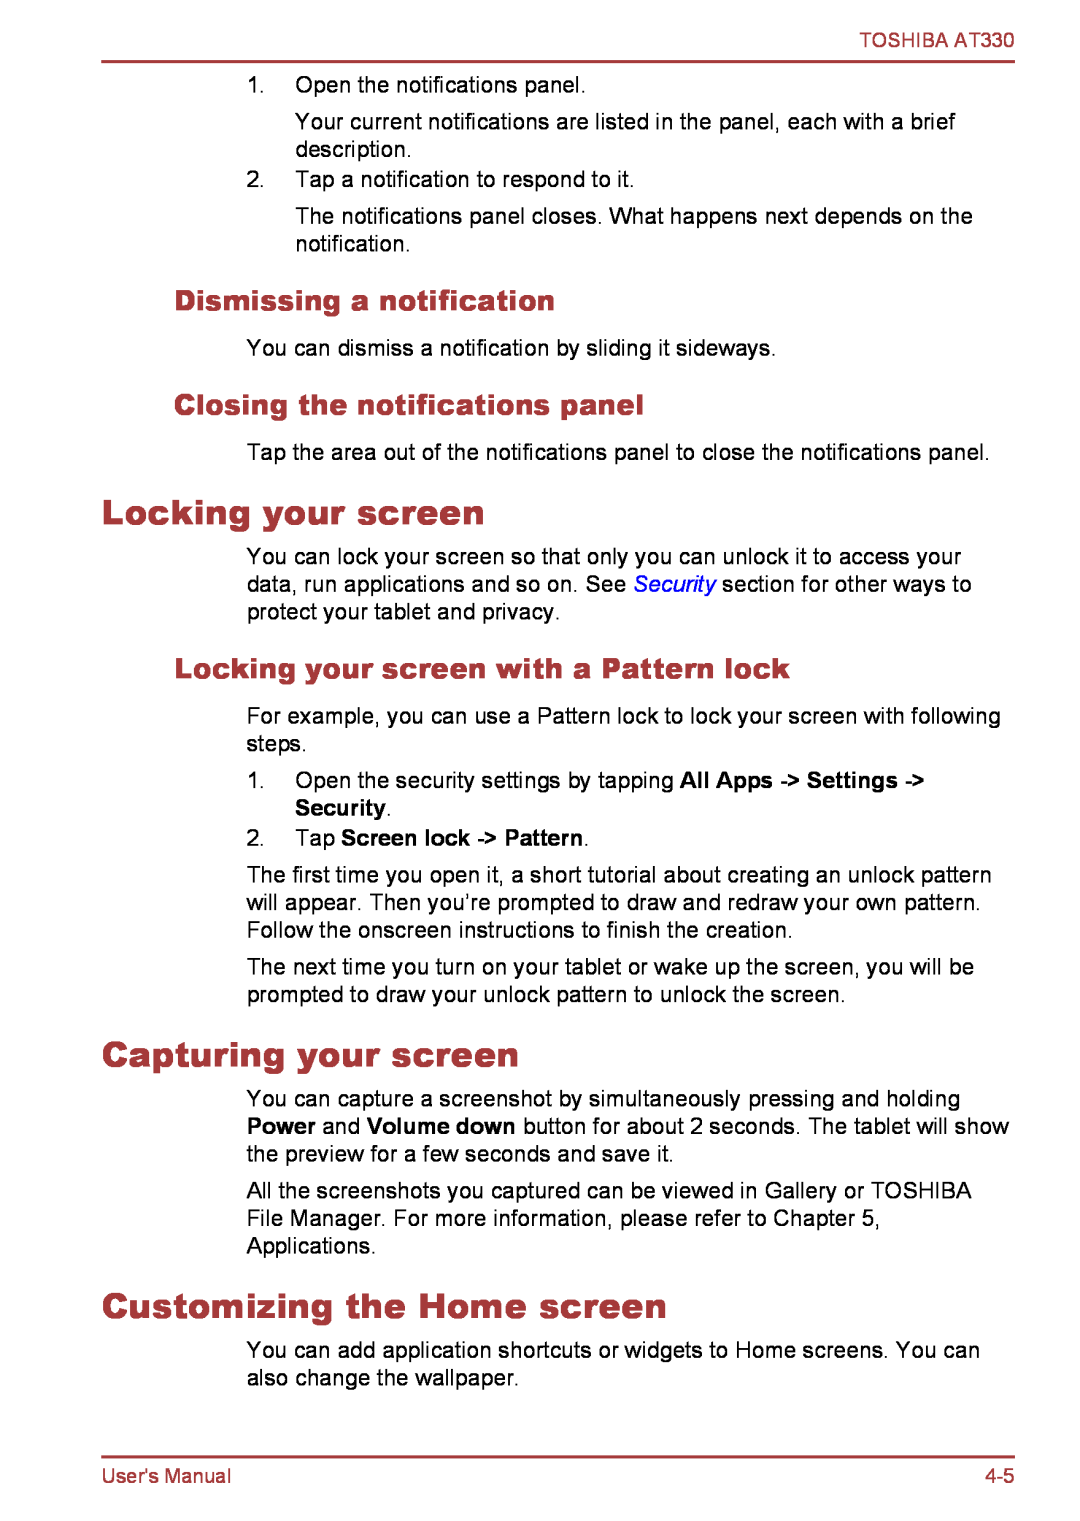 Toshiba at330 Locking your screen, Capturing your screen, Customizing the Home screen, Dismissing a notification 